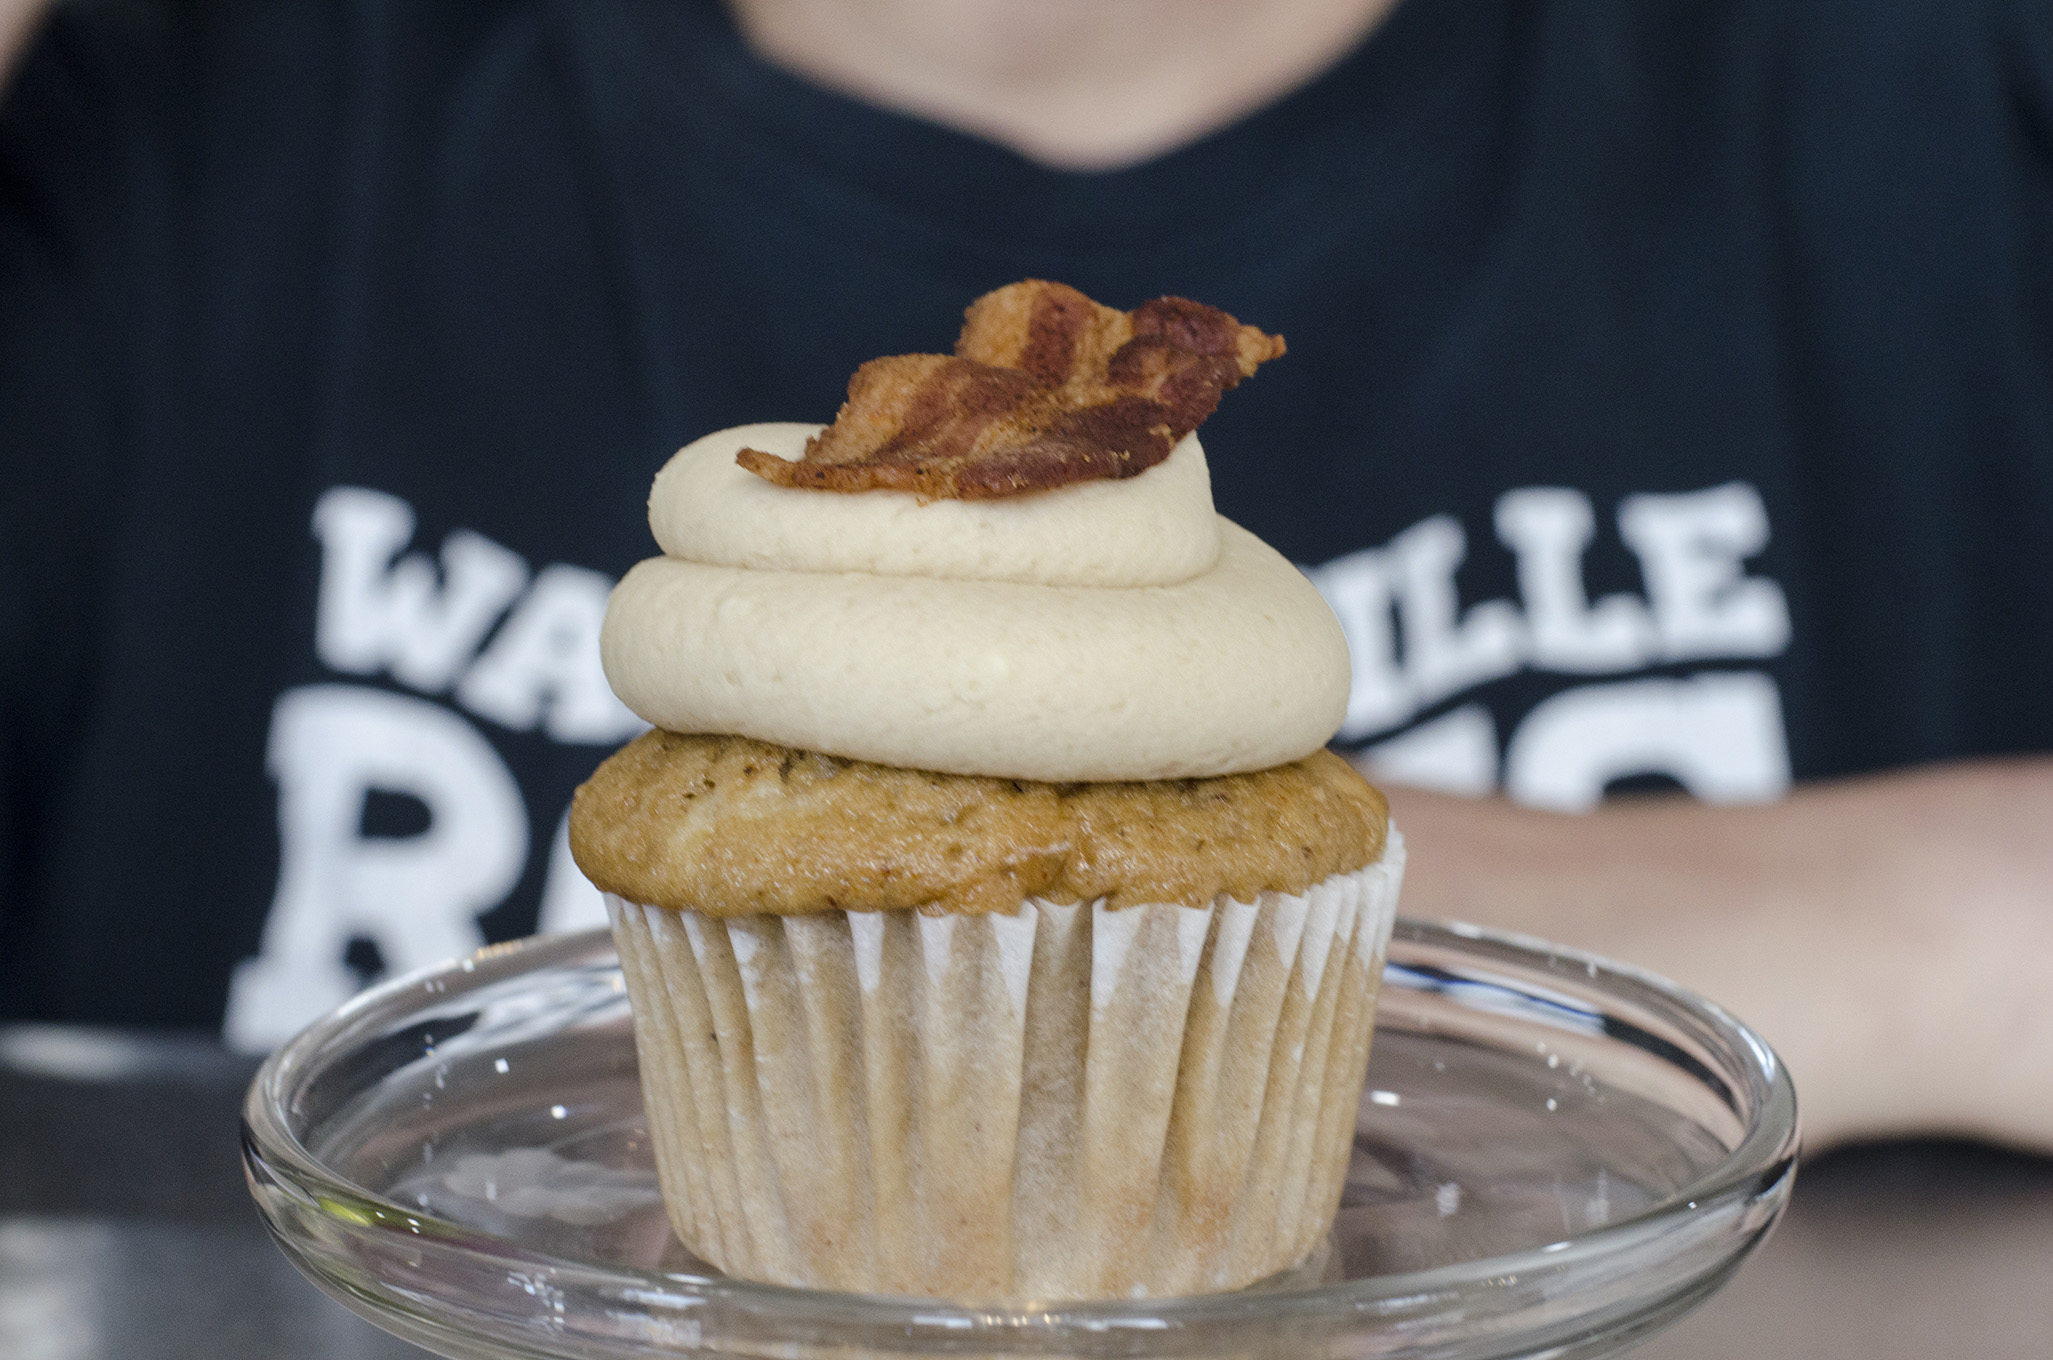 Canadian Maple Bacon cupcake from Klueless Cupcakes in Walkerville.